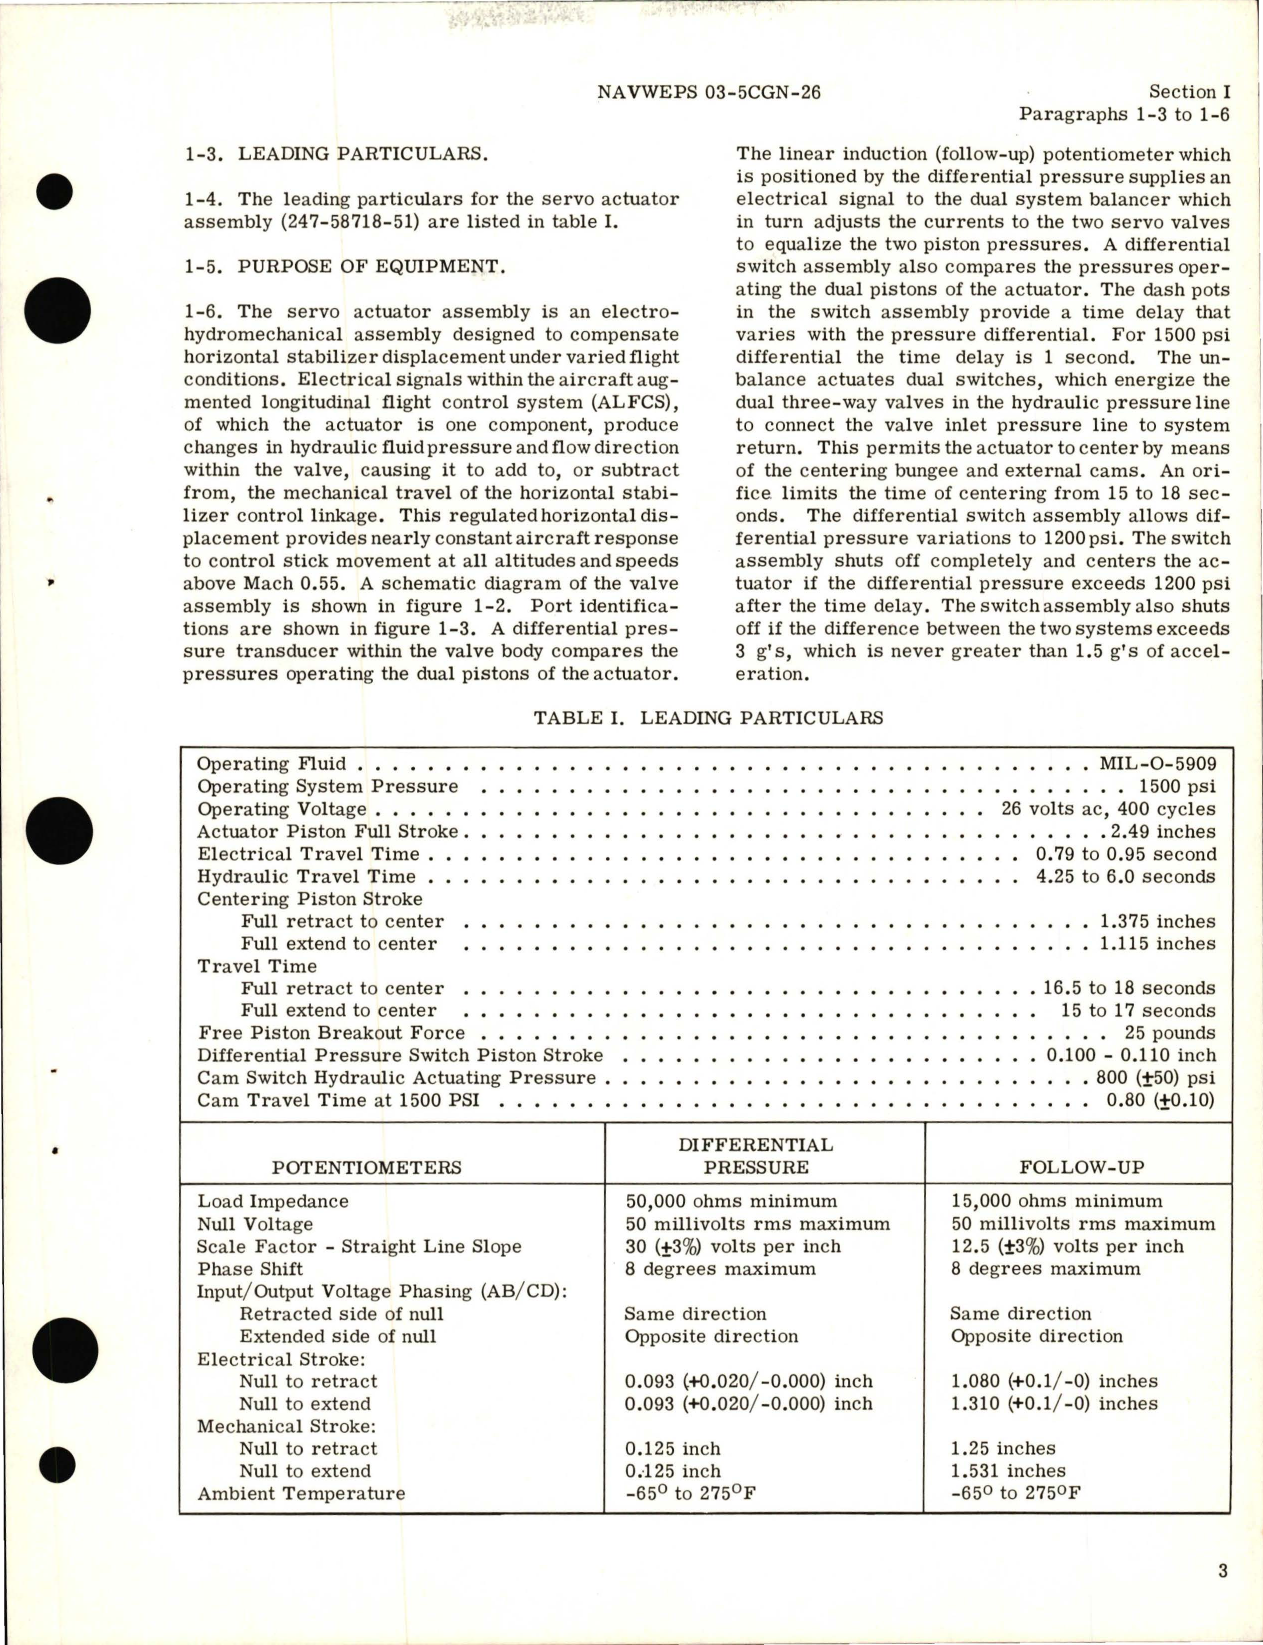 Sample page 5 from AirCorps Library document: Overhaul Instructions for Hydraulic Flight Control Horizontal Stabilizer Series Servo Actuator Assembly - Part 247-58718-51